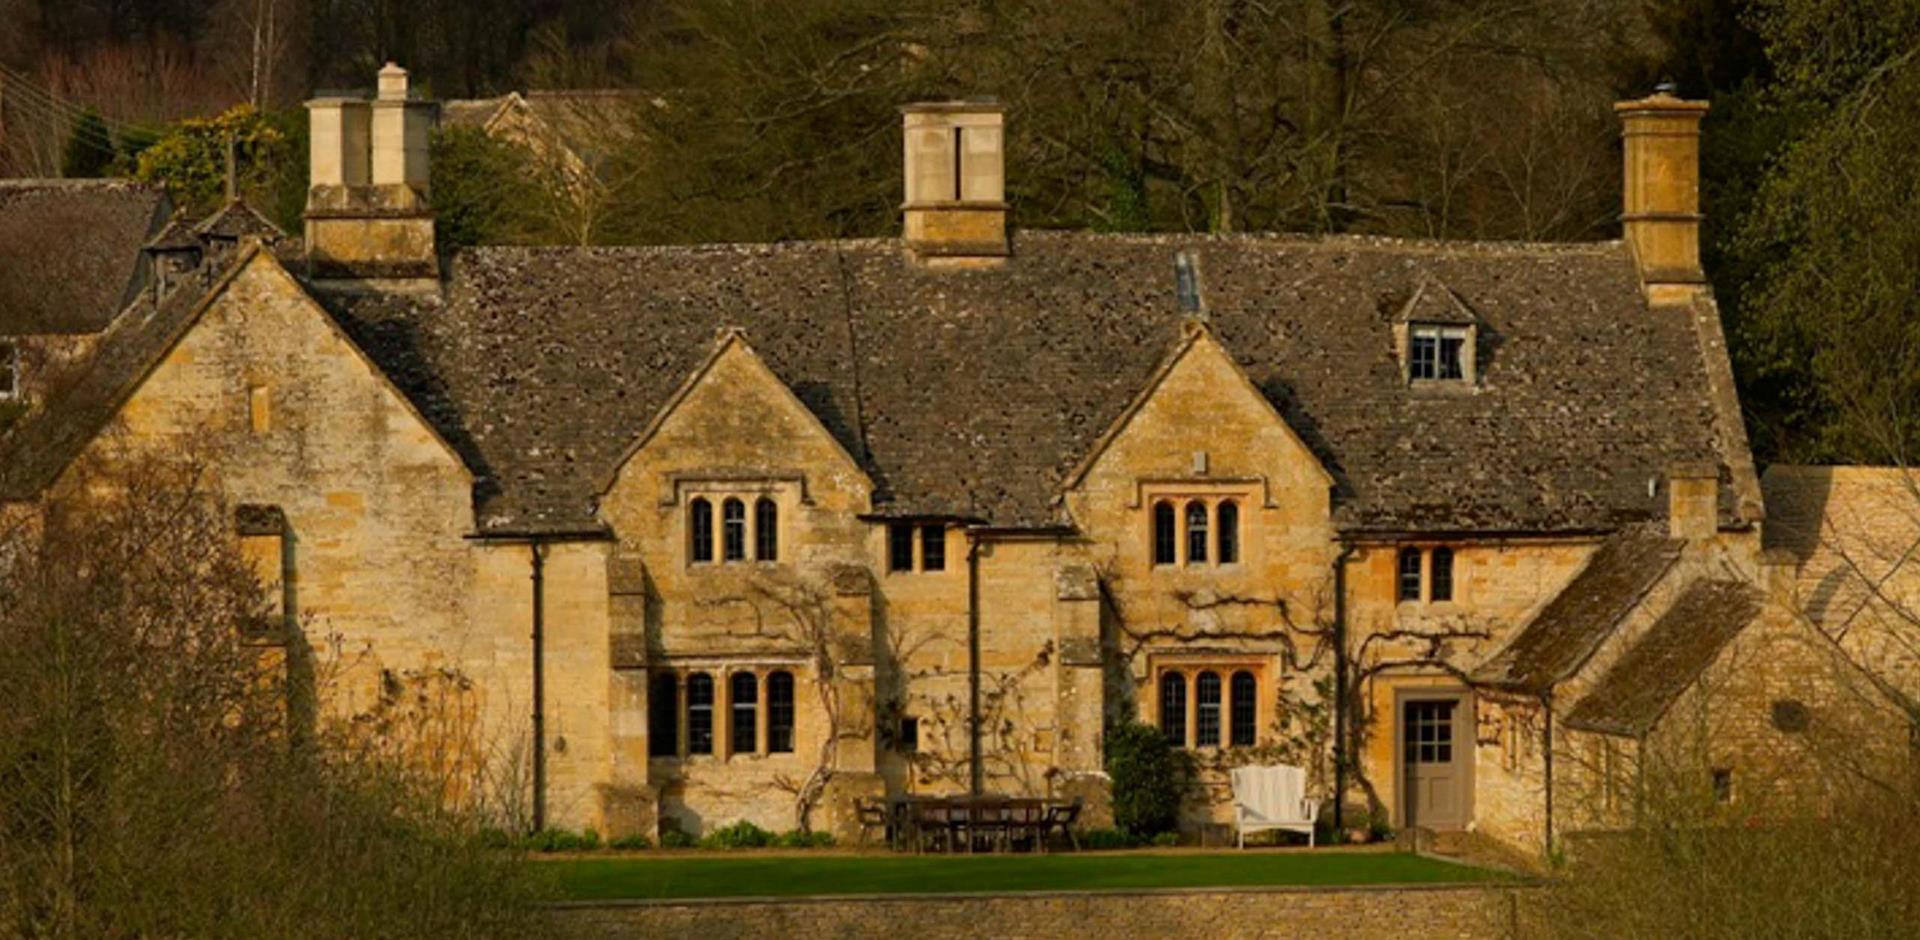 Temple Guiting Estate, The Cotswolds, UK